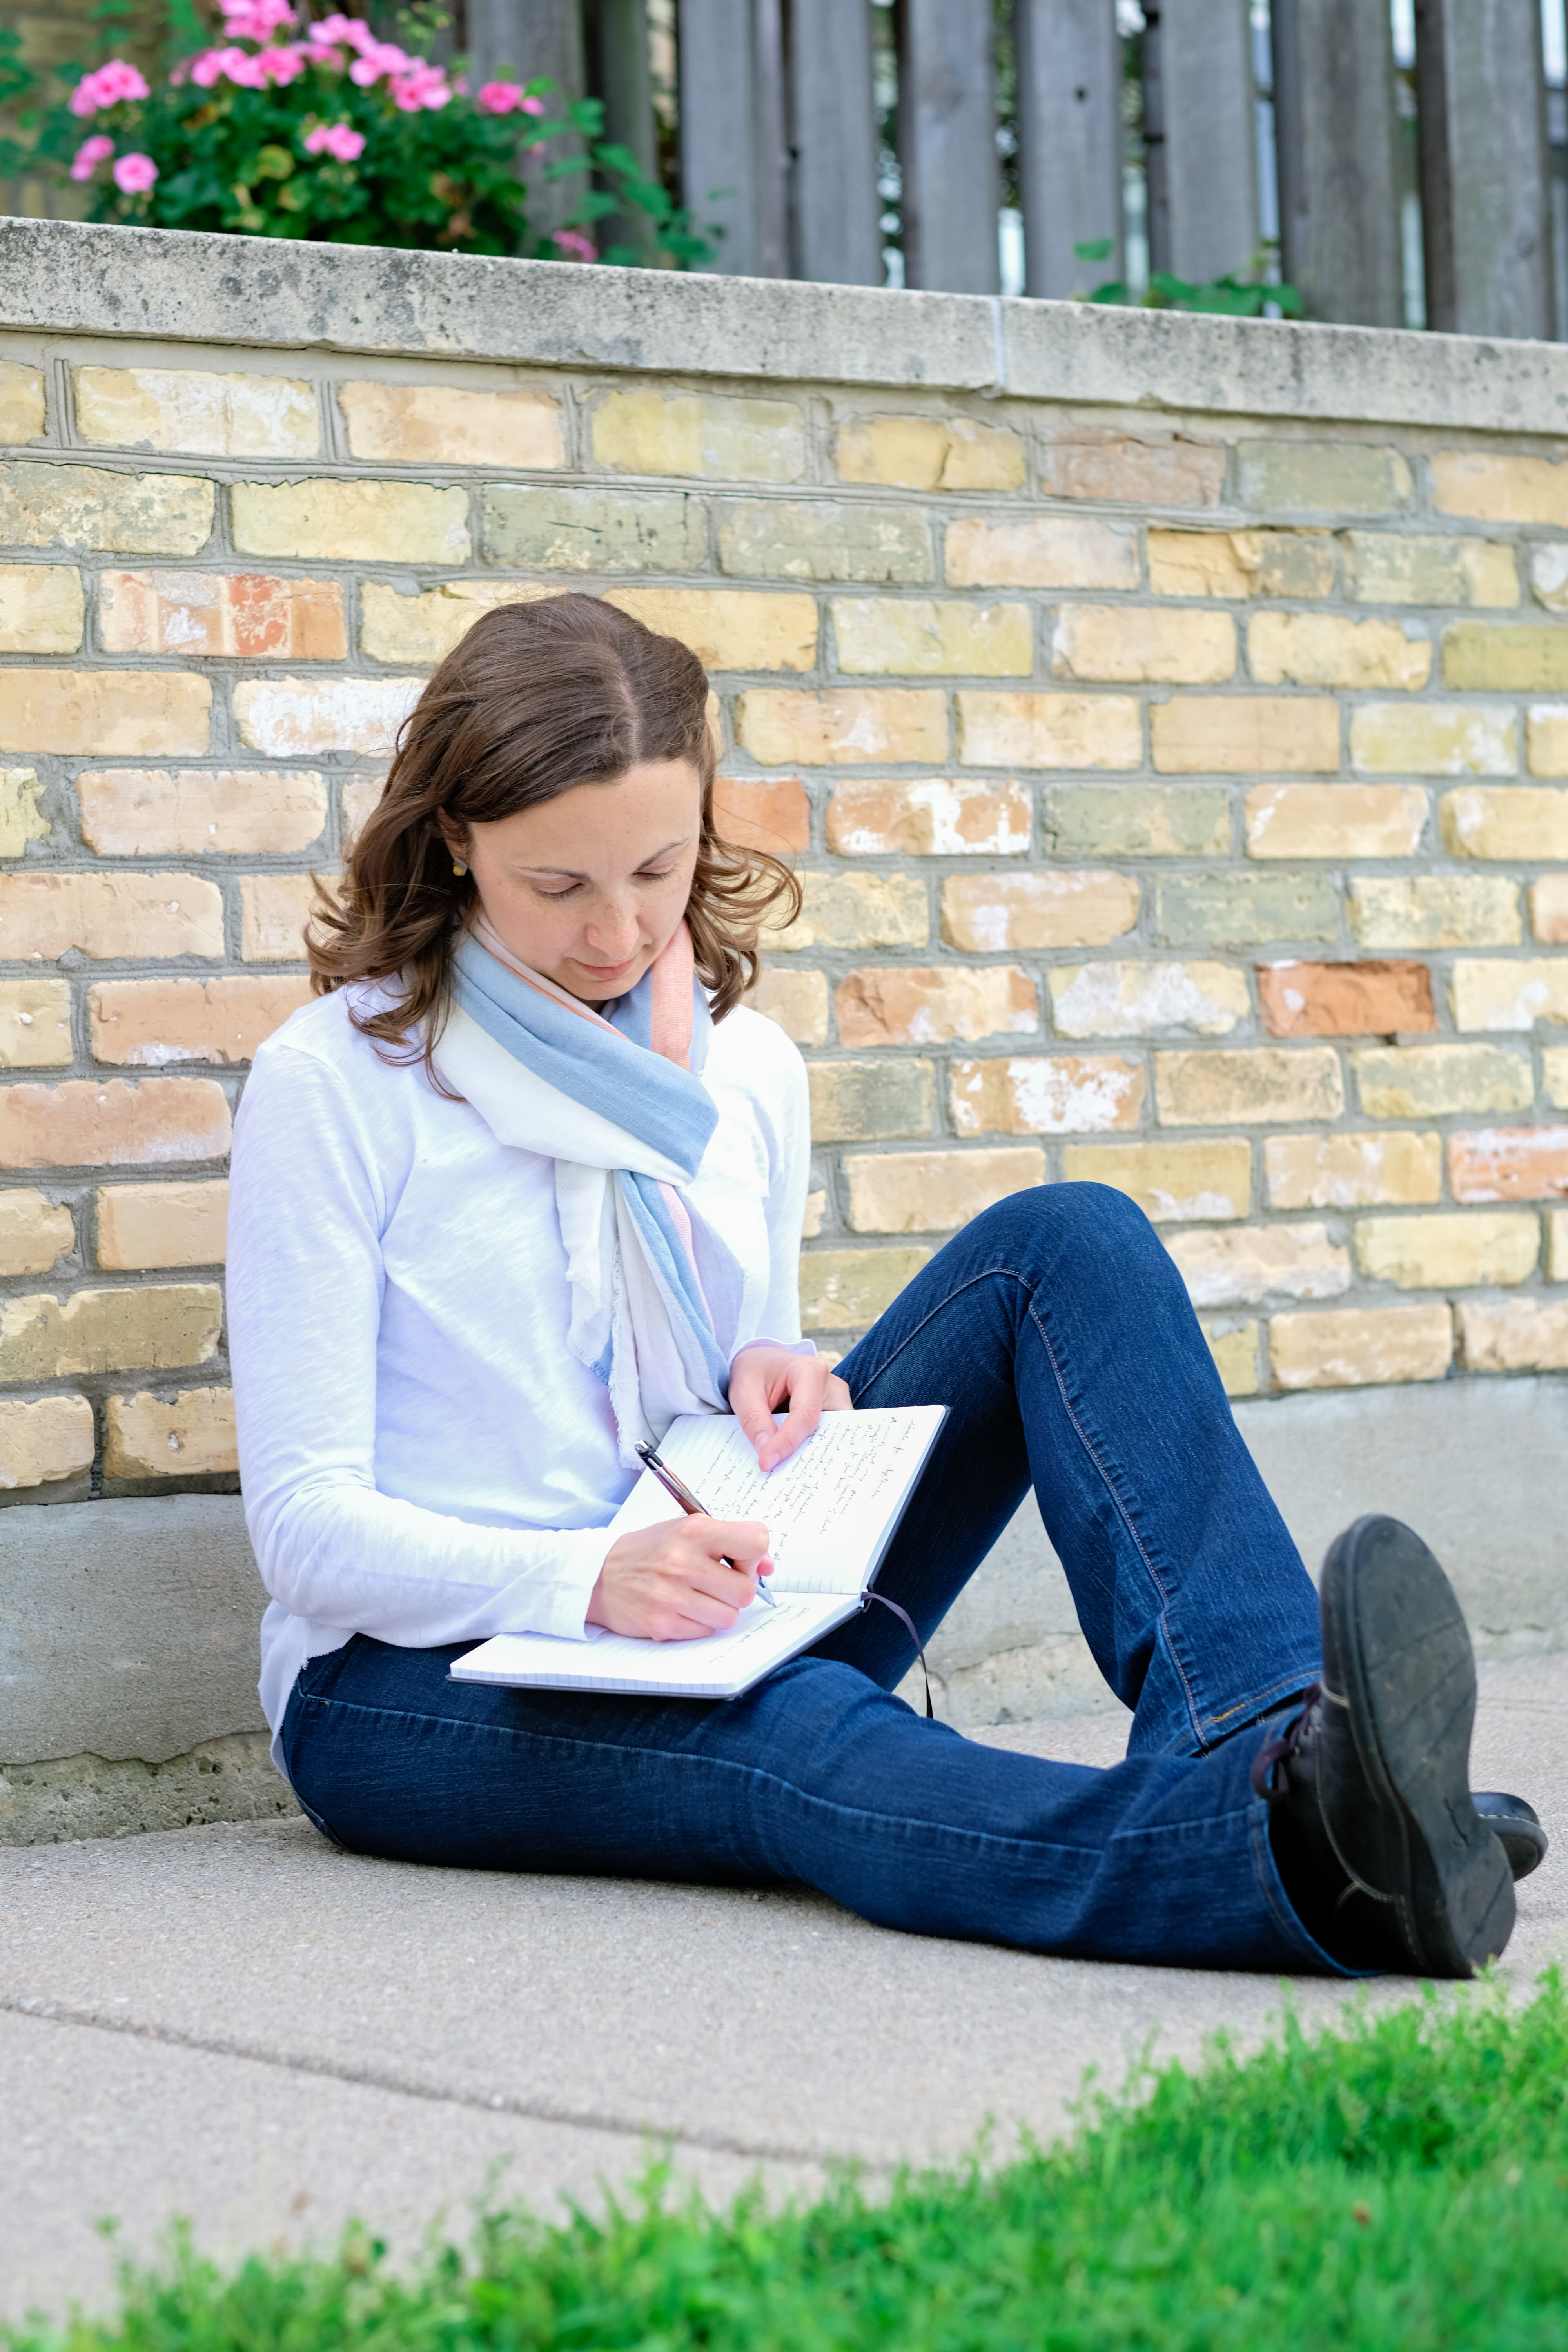 Lori Wolf-Heffner sits in front of a brick wall, writing in a journal